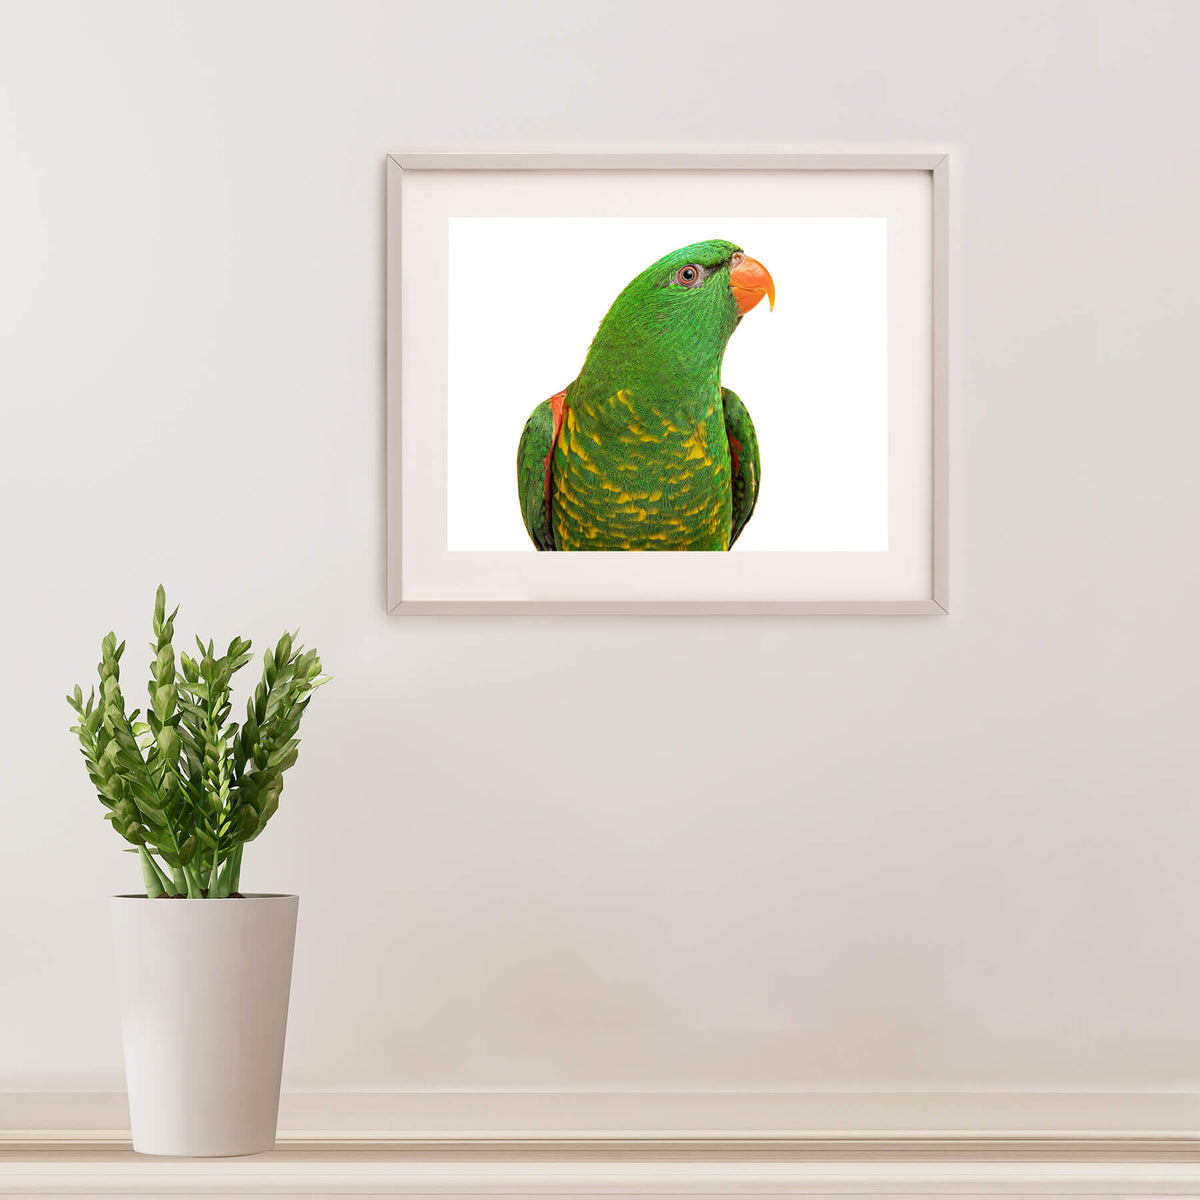 Gary, the Scaly-breasted Lorikeet